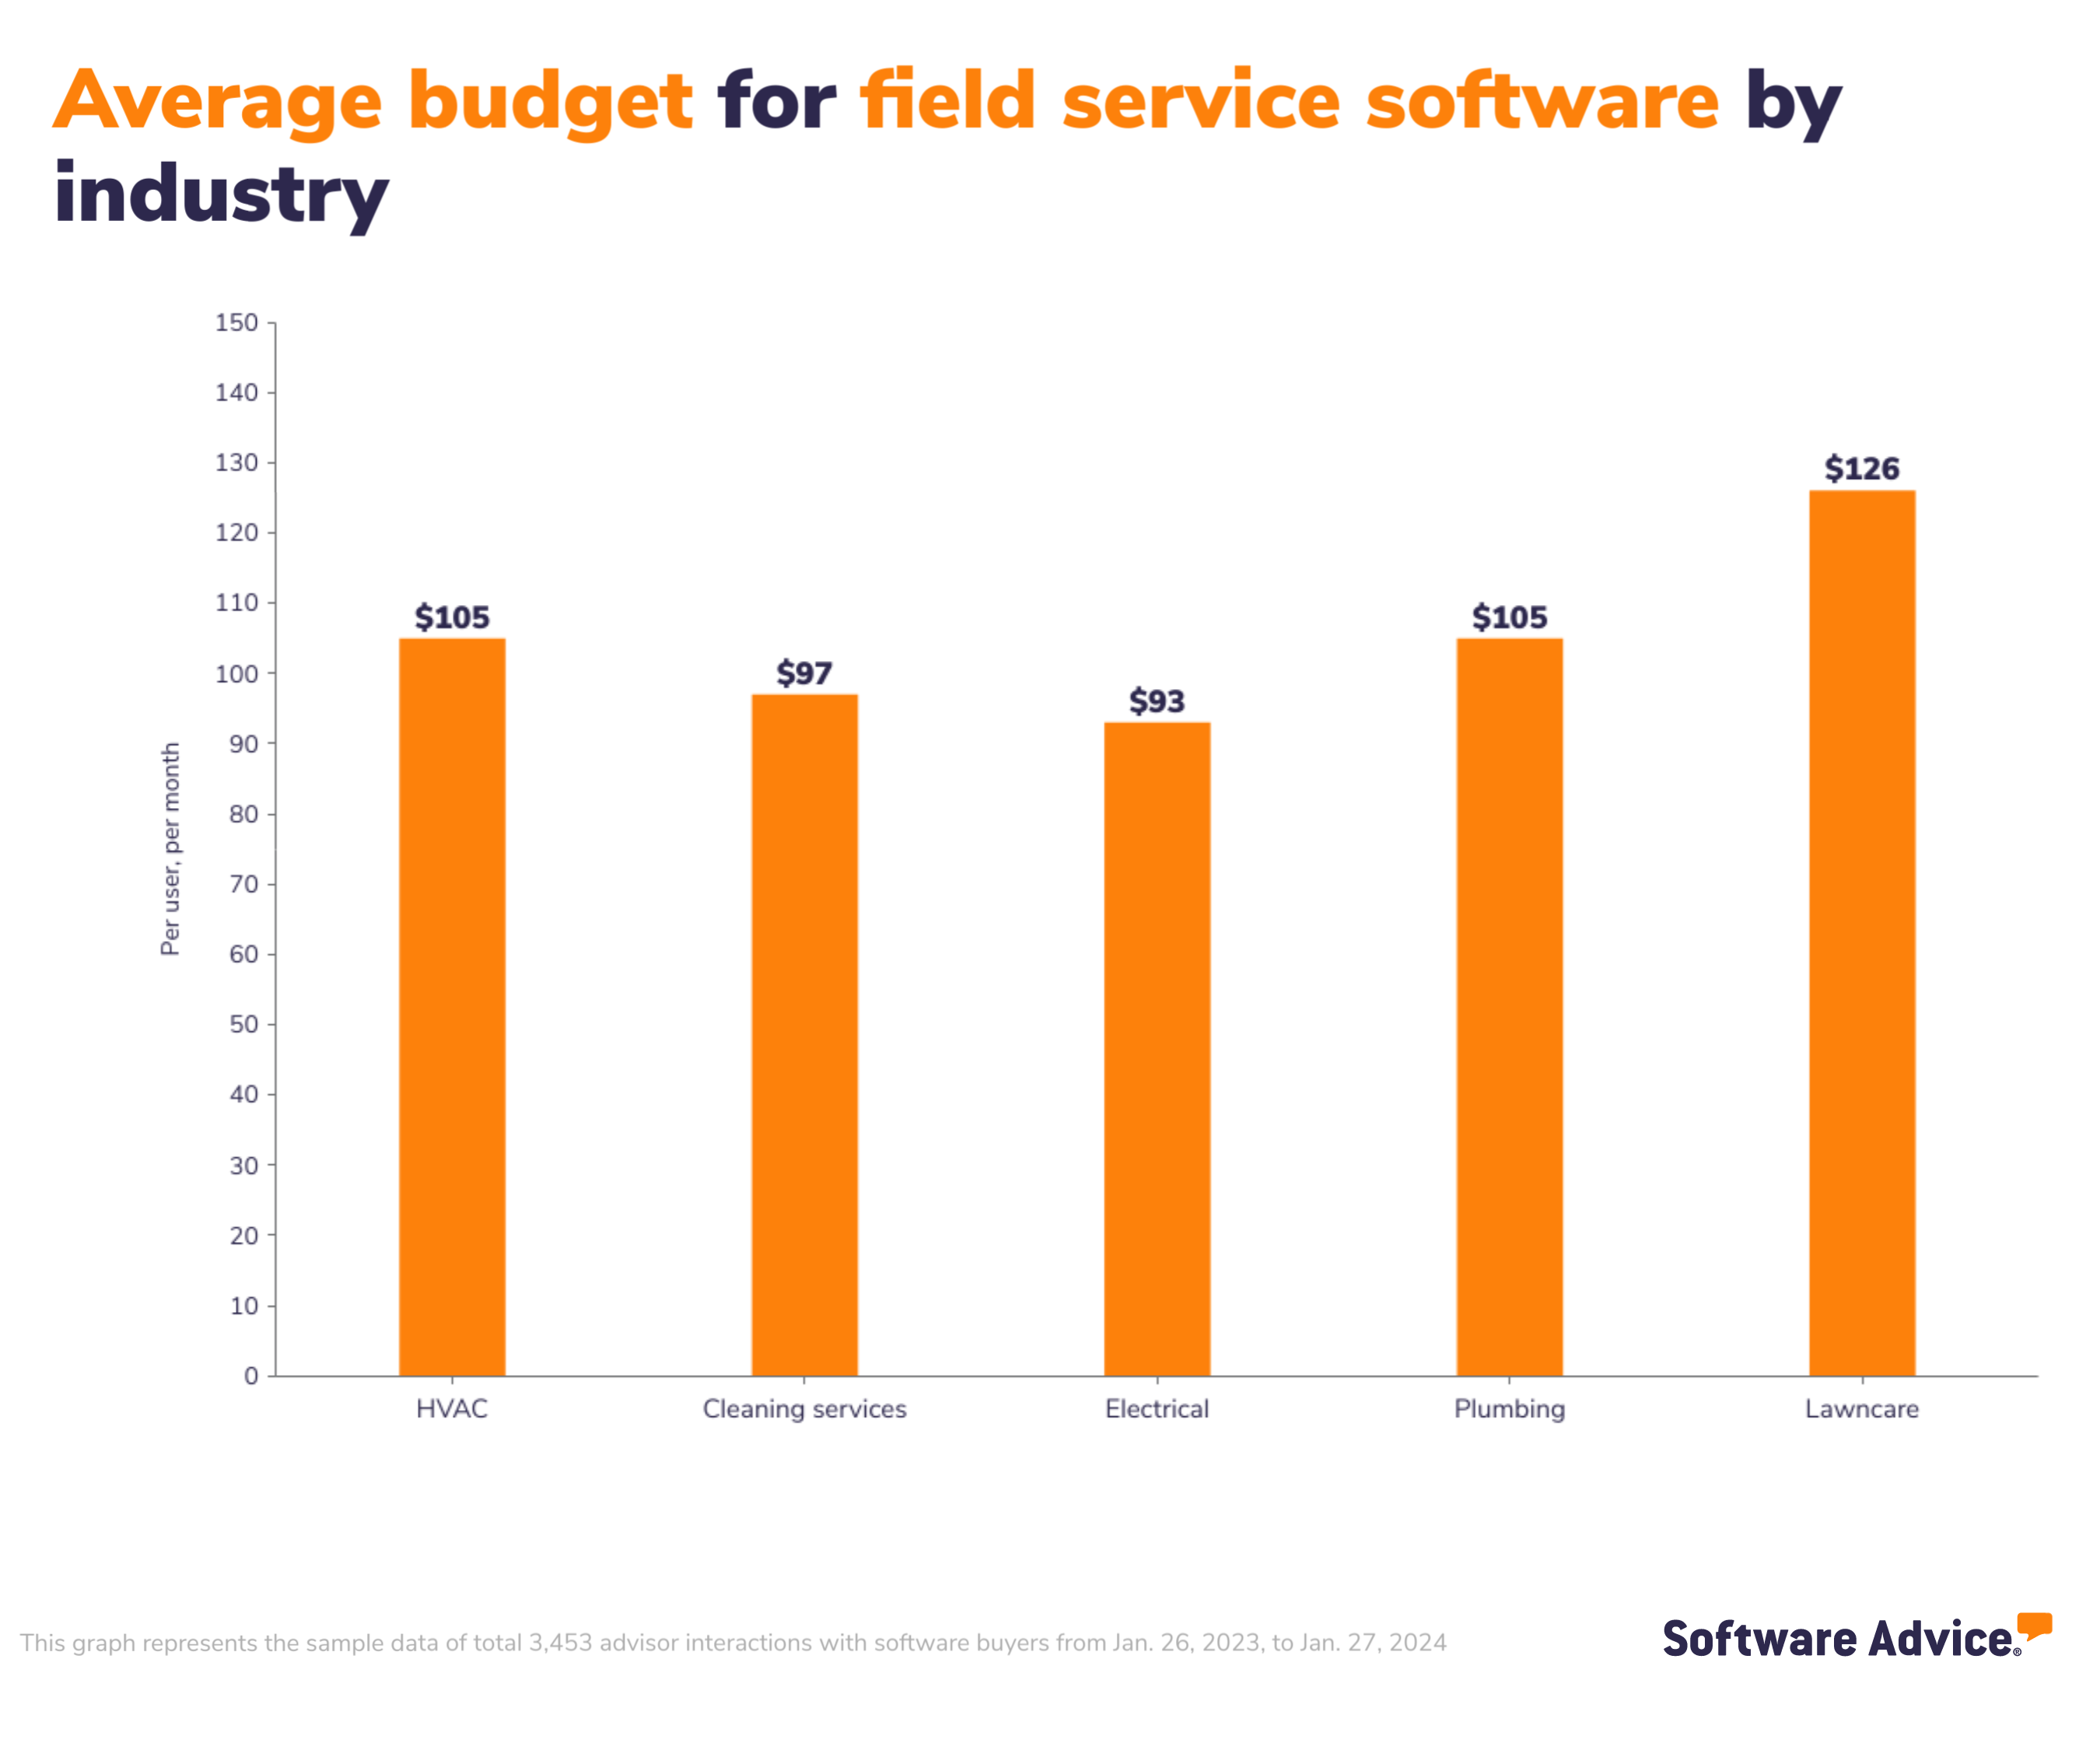 Software Advice graphic: Average budget for field service software by industry